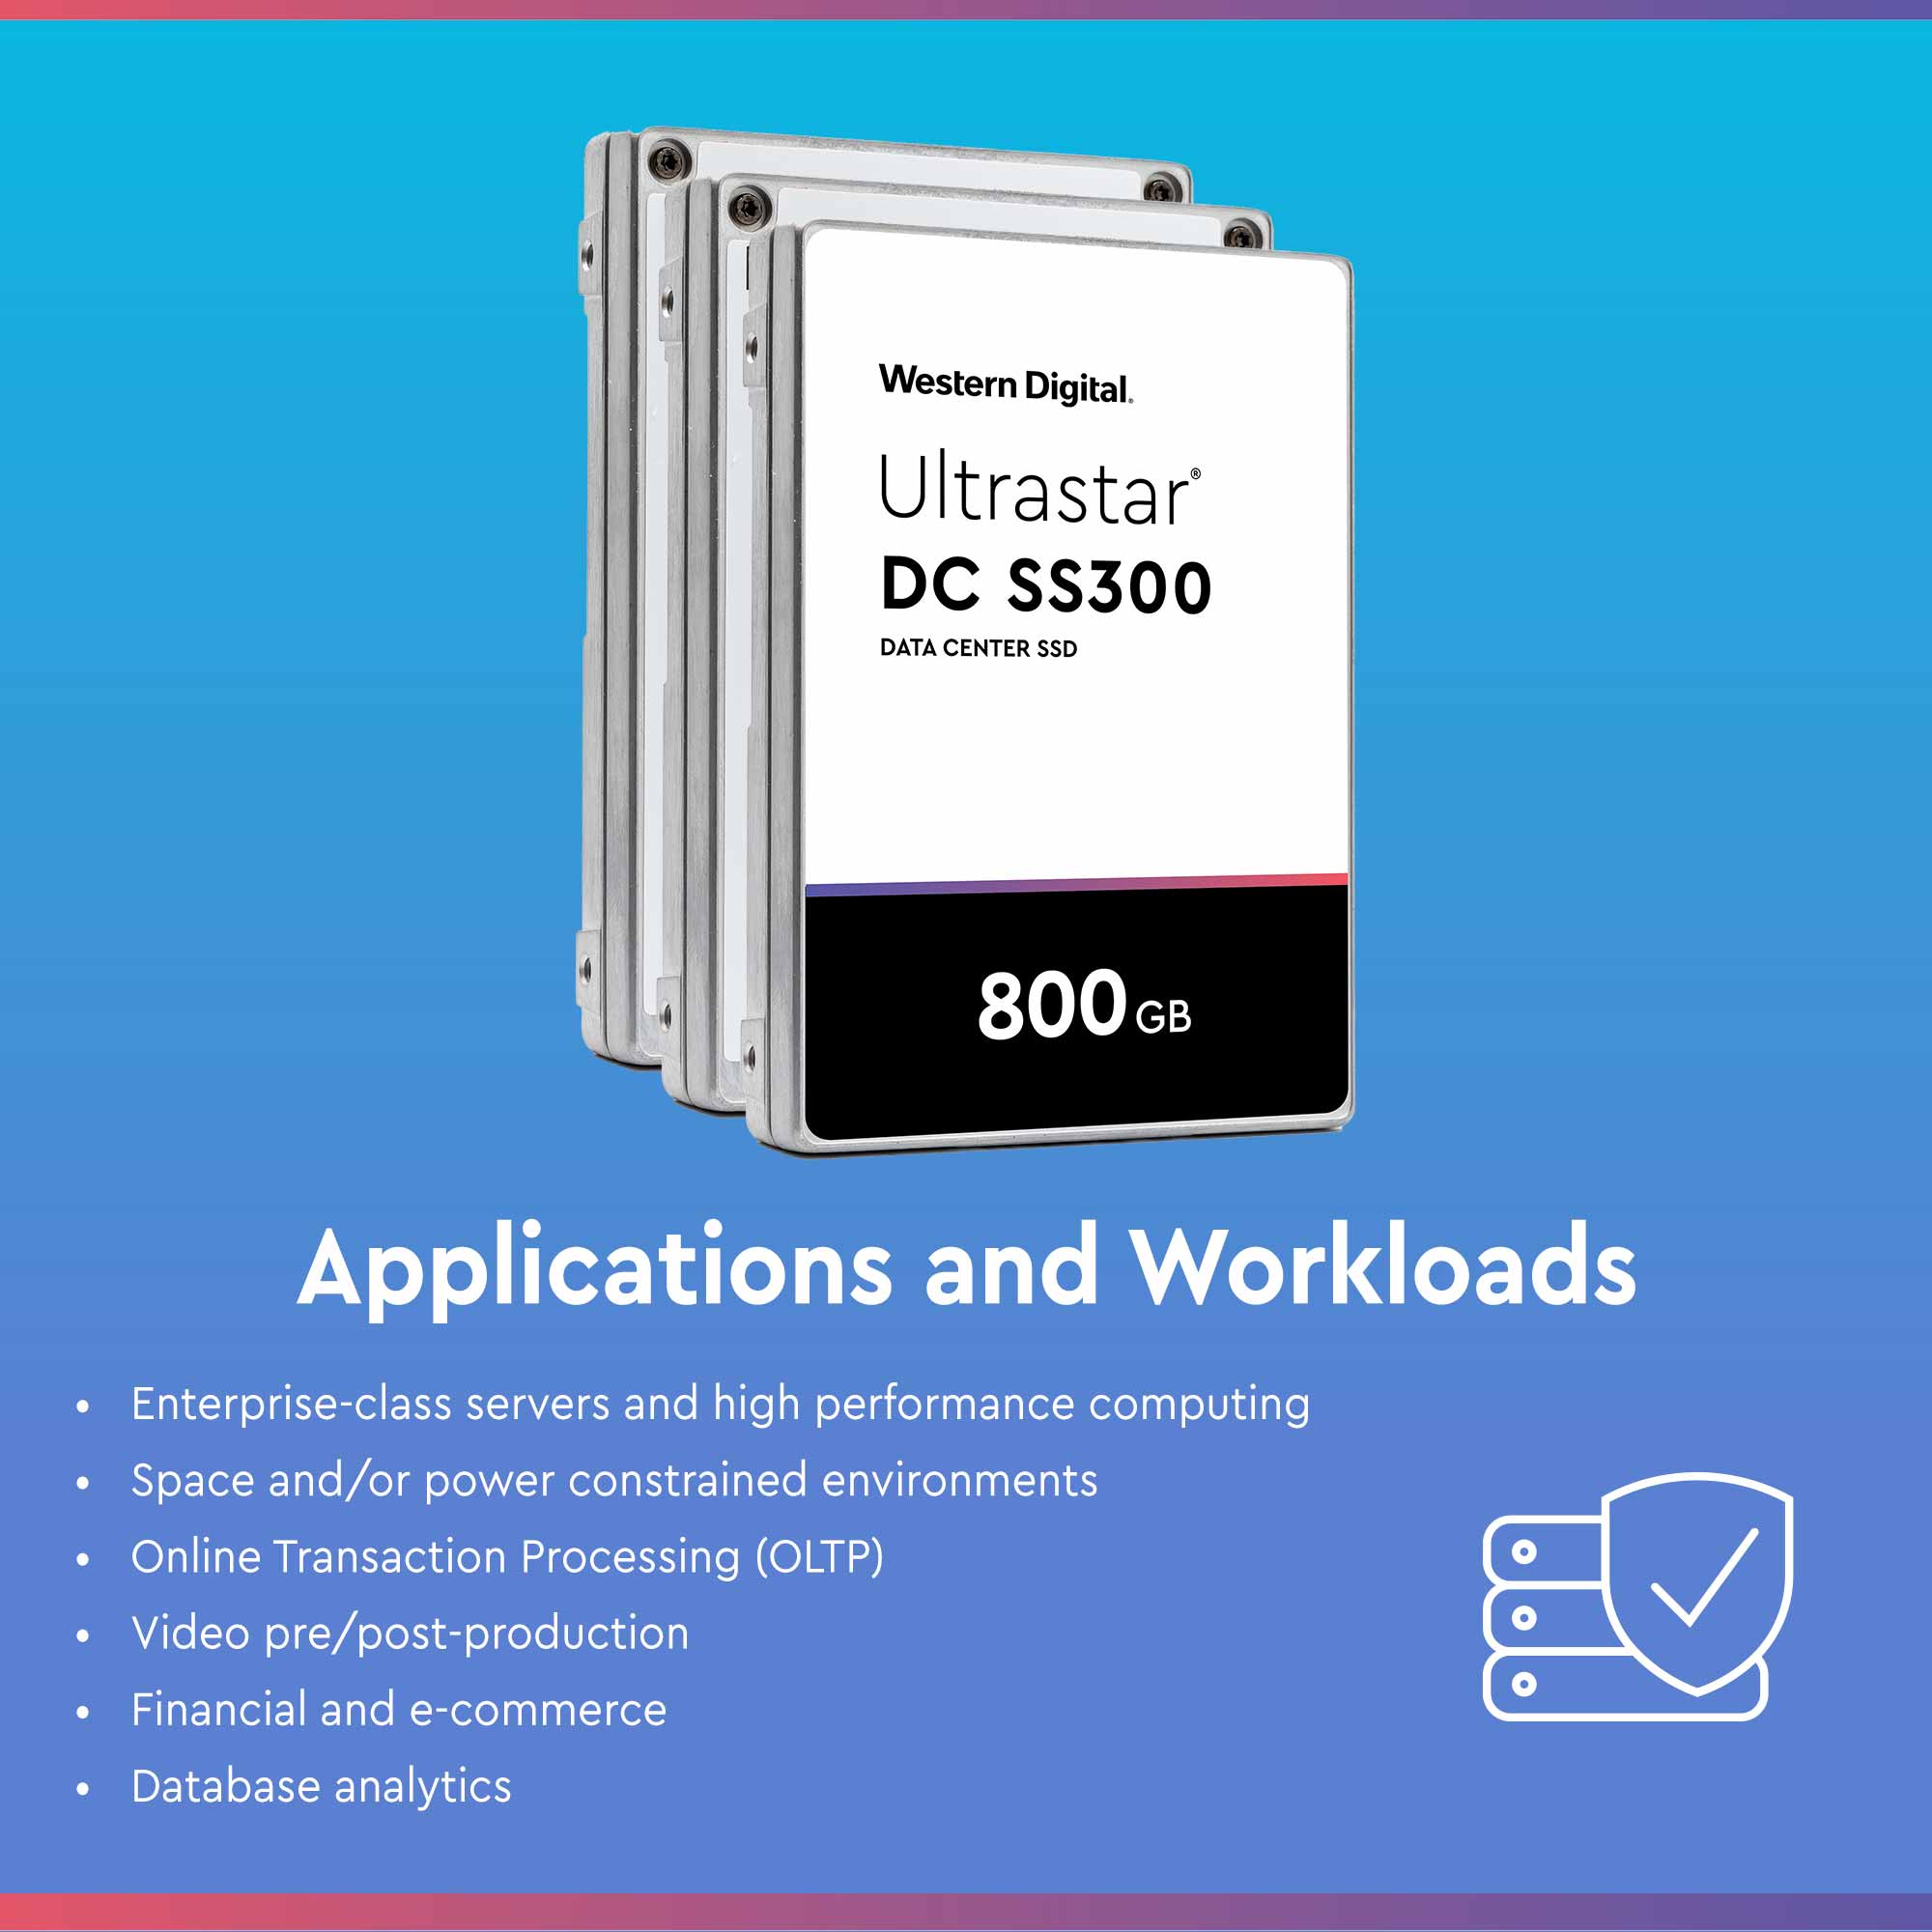 Western Digital DC SS300 HUSMM3280ASS204 800GB SAS 12Gb/s 512e 2.5in Recertified Solid State Drive - Applications and Workloads